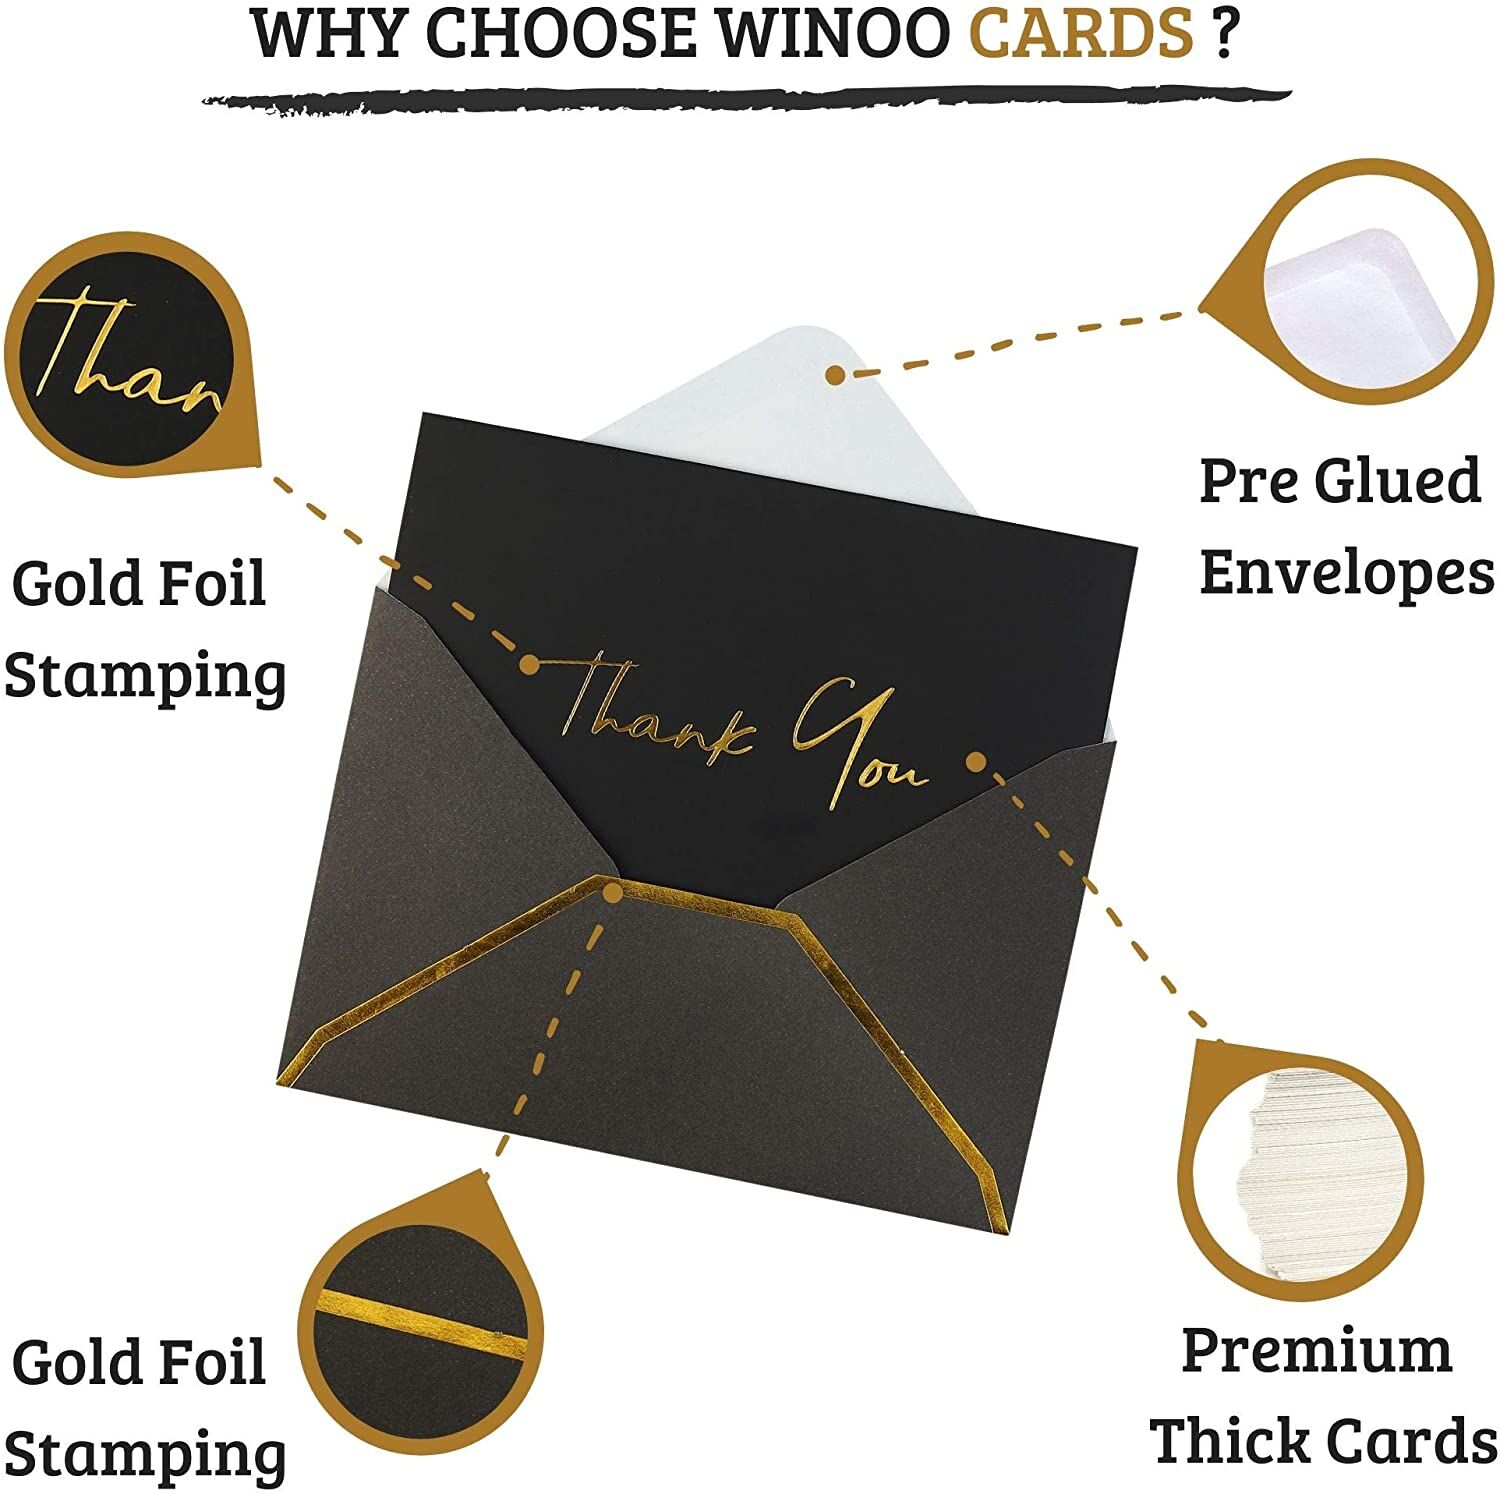 Custom Luxury Black Small Business Thank You Cards Gold Foil Business Card Printing with Envelopes 